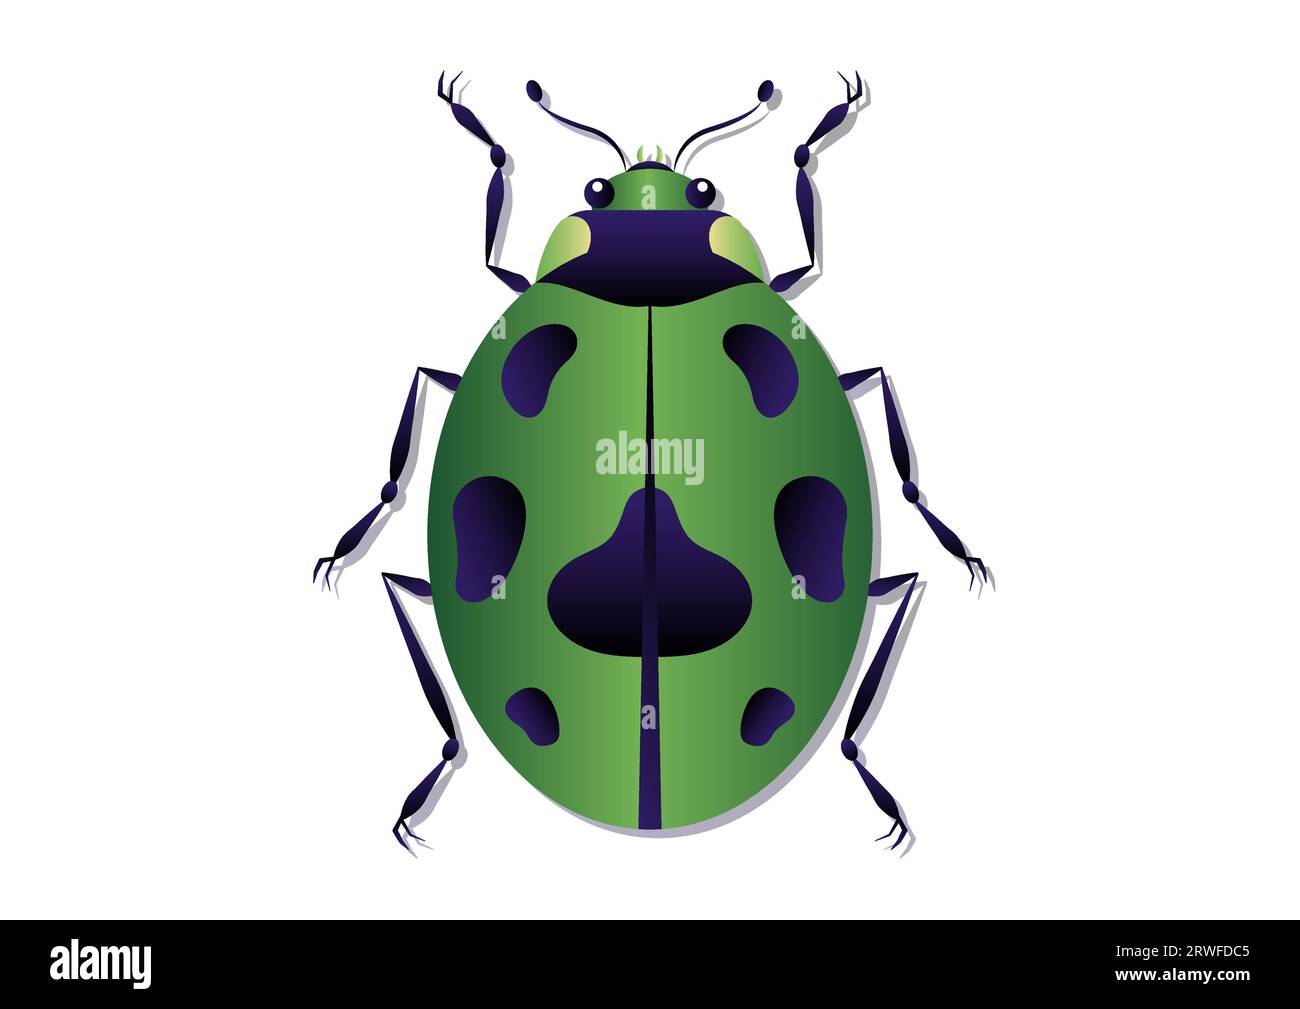 Green Beetle Vector Art. Green Ladybug Clipart Isolated on White Background Stock Vector